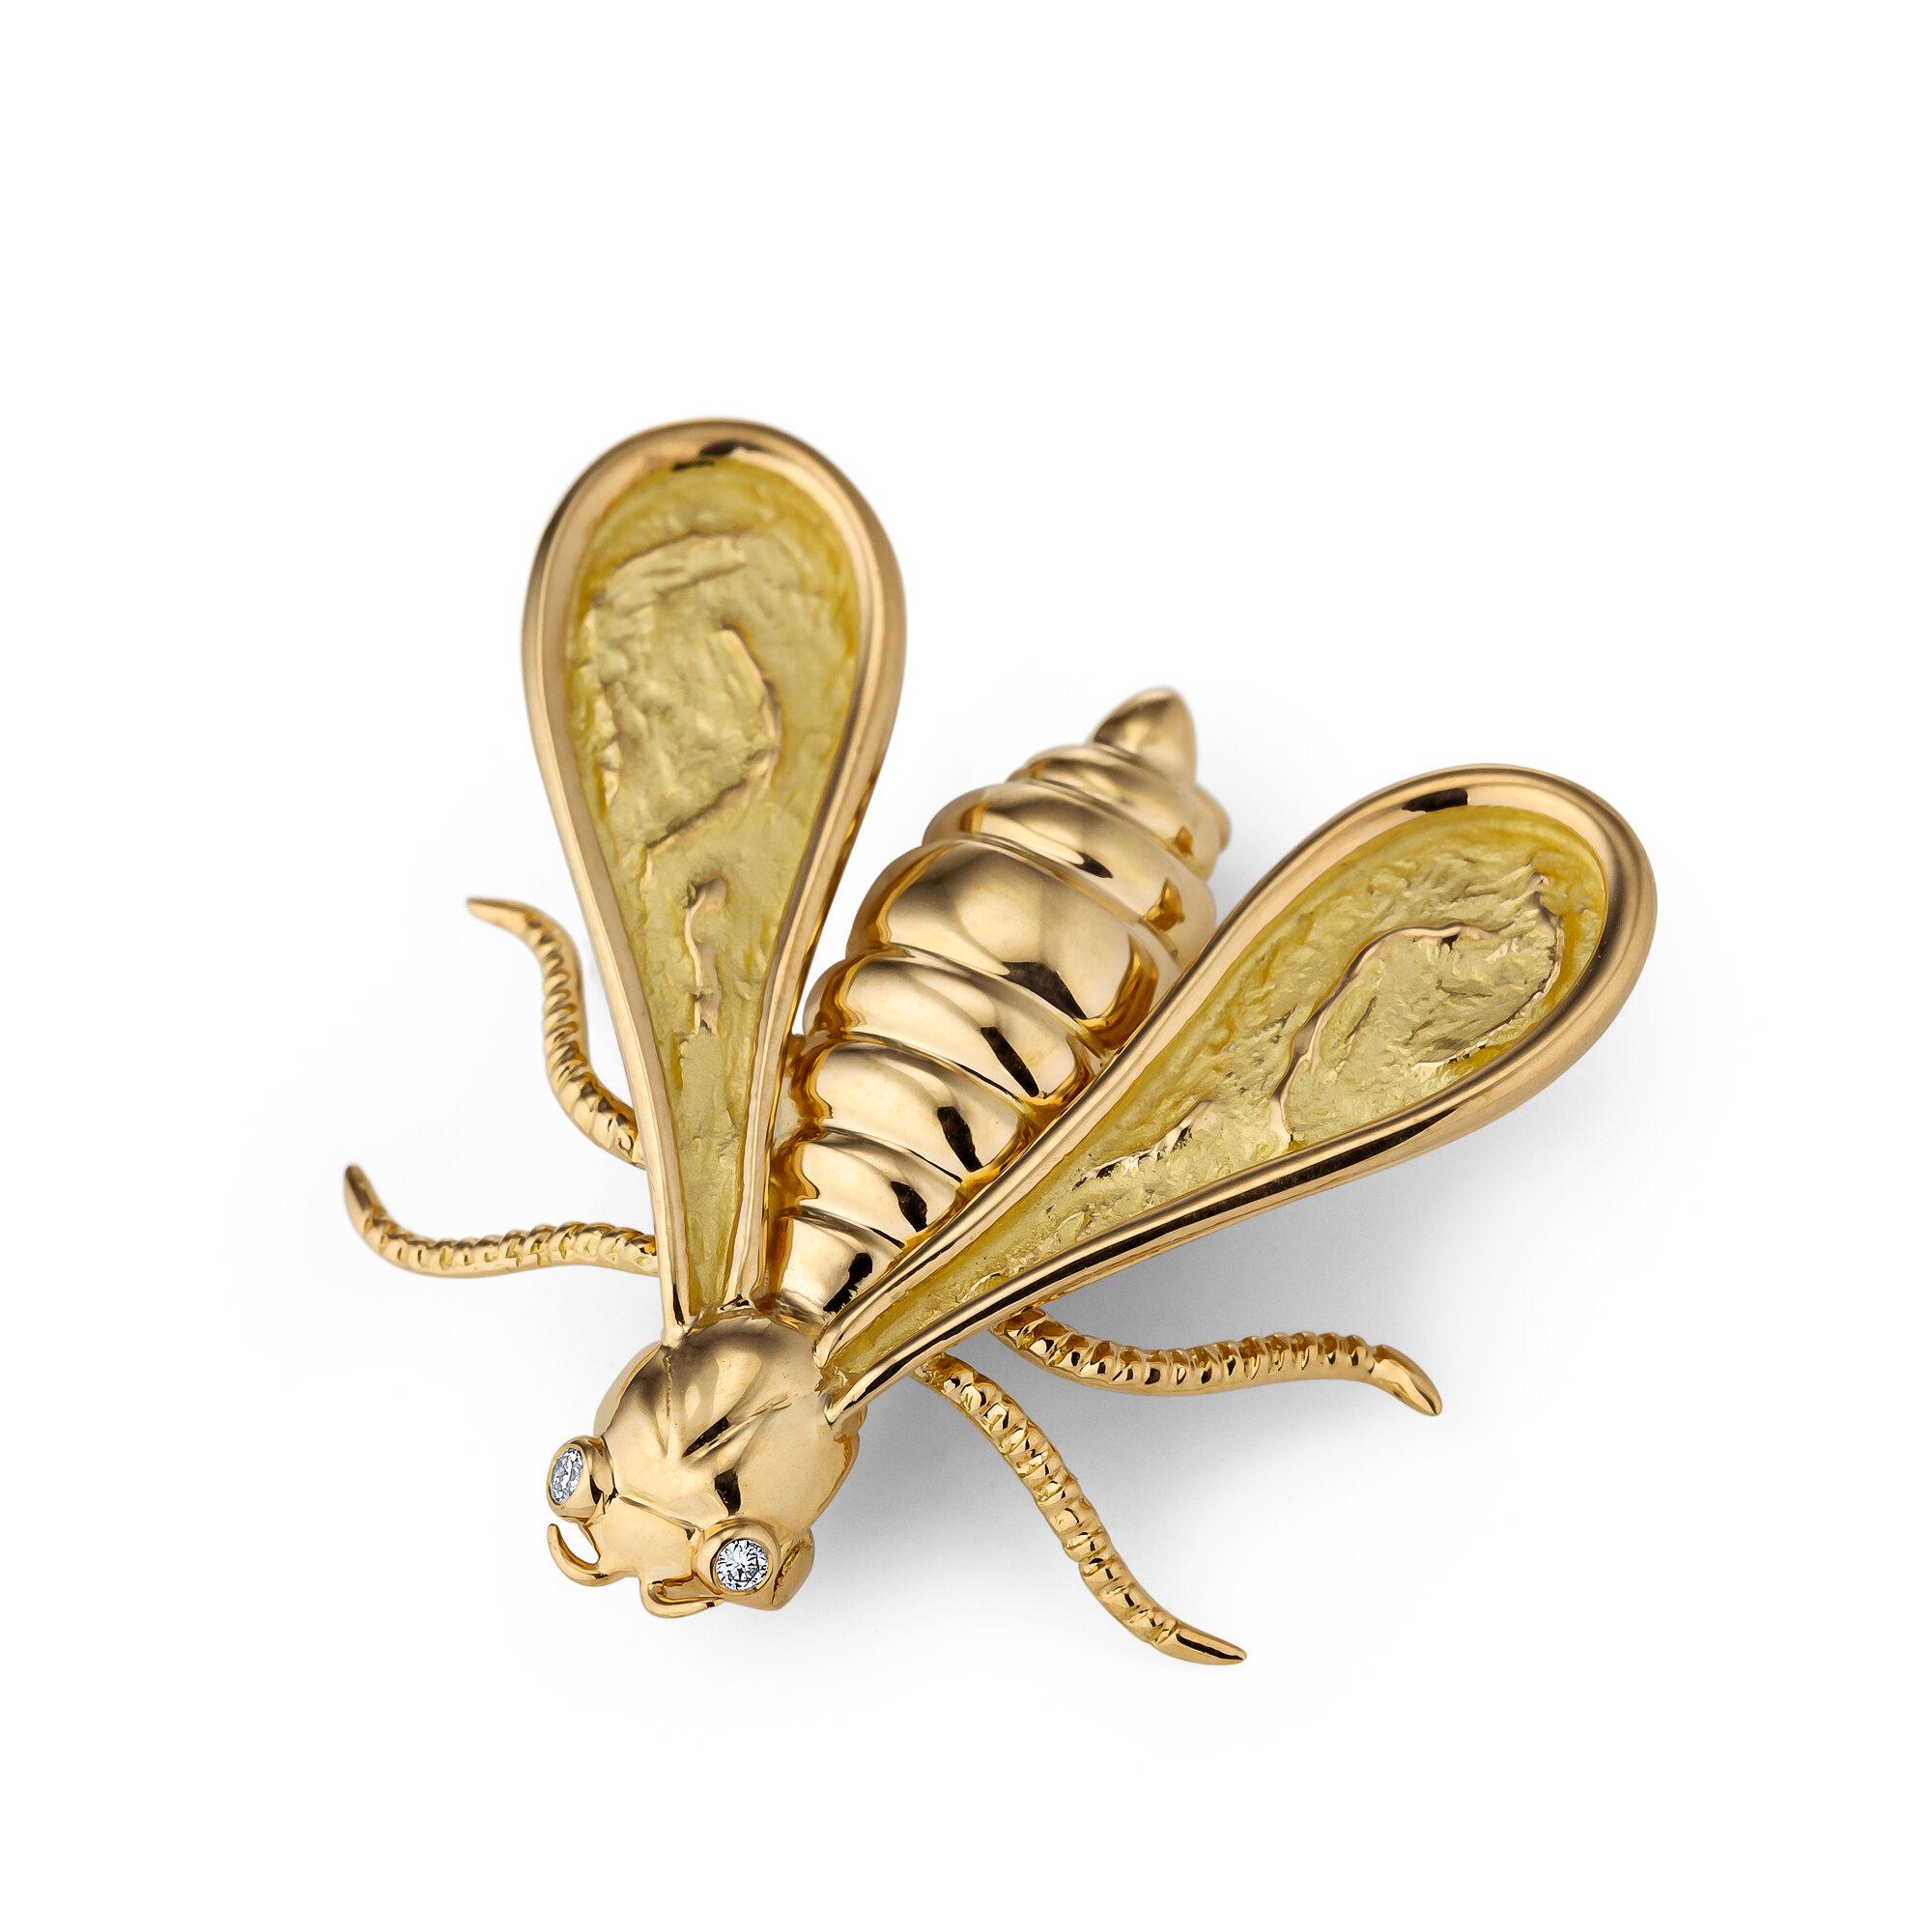 Don't worry you will always 'bee' happy when wearing this delightful Chaumet Paris vintage brooch!  With a beautifully detailed body and a sparkling pair of diamond eyes, this 18 karat yellow gold bee pin will be the buzz your wardrobe needs.  Circa